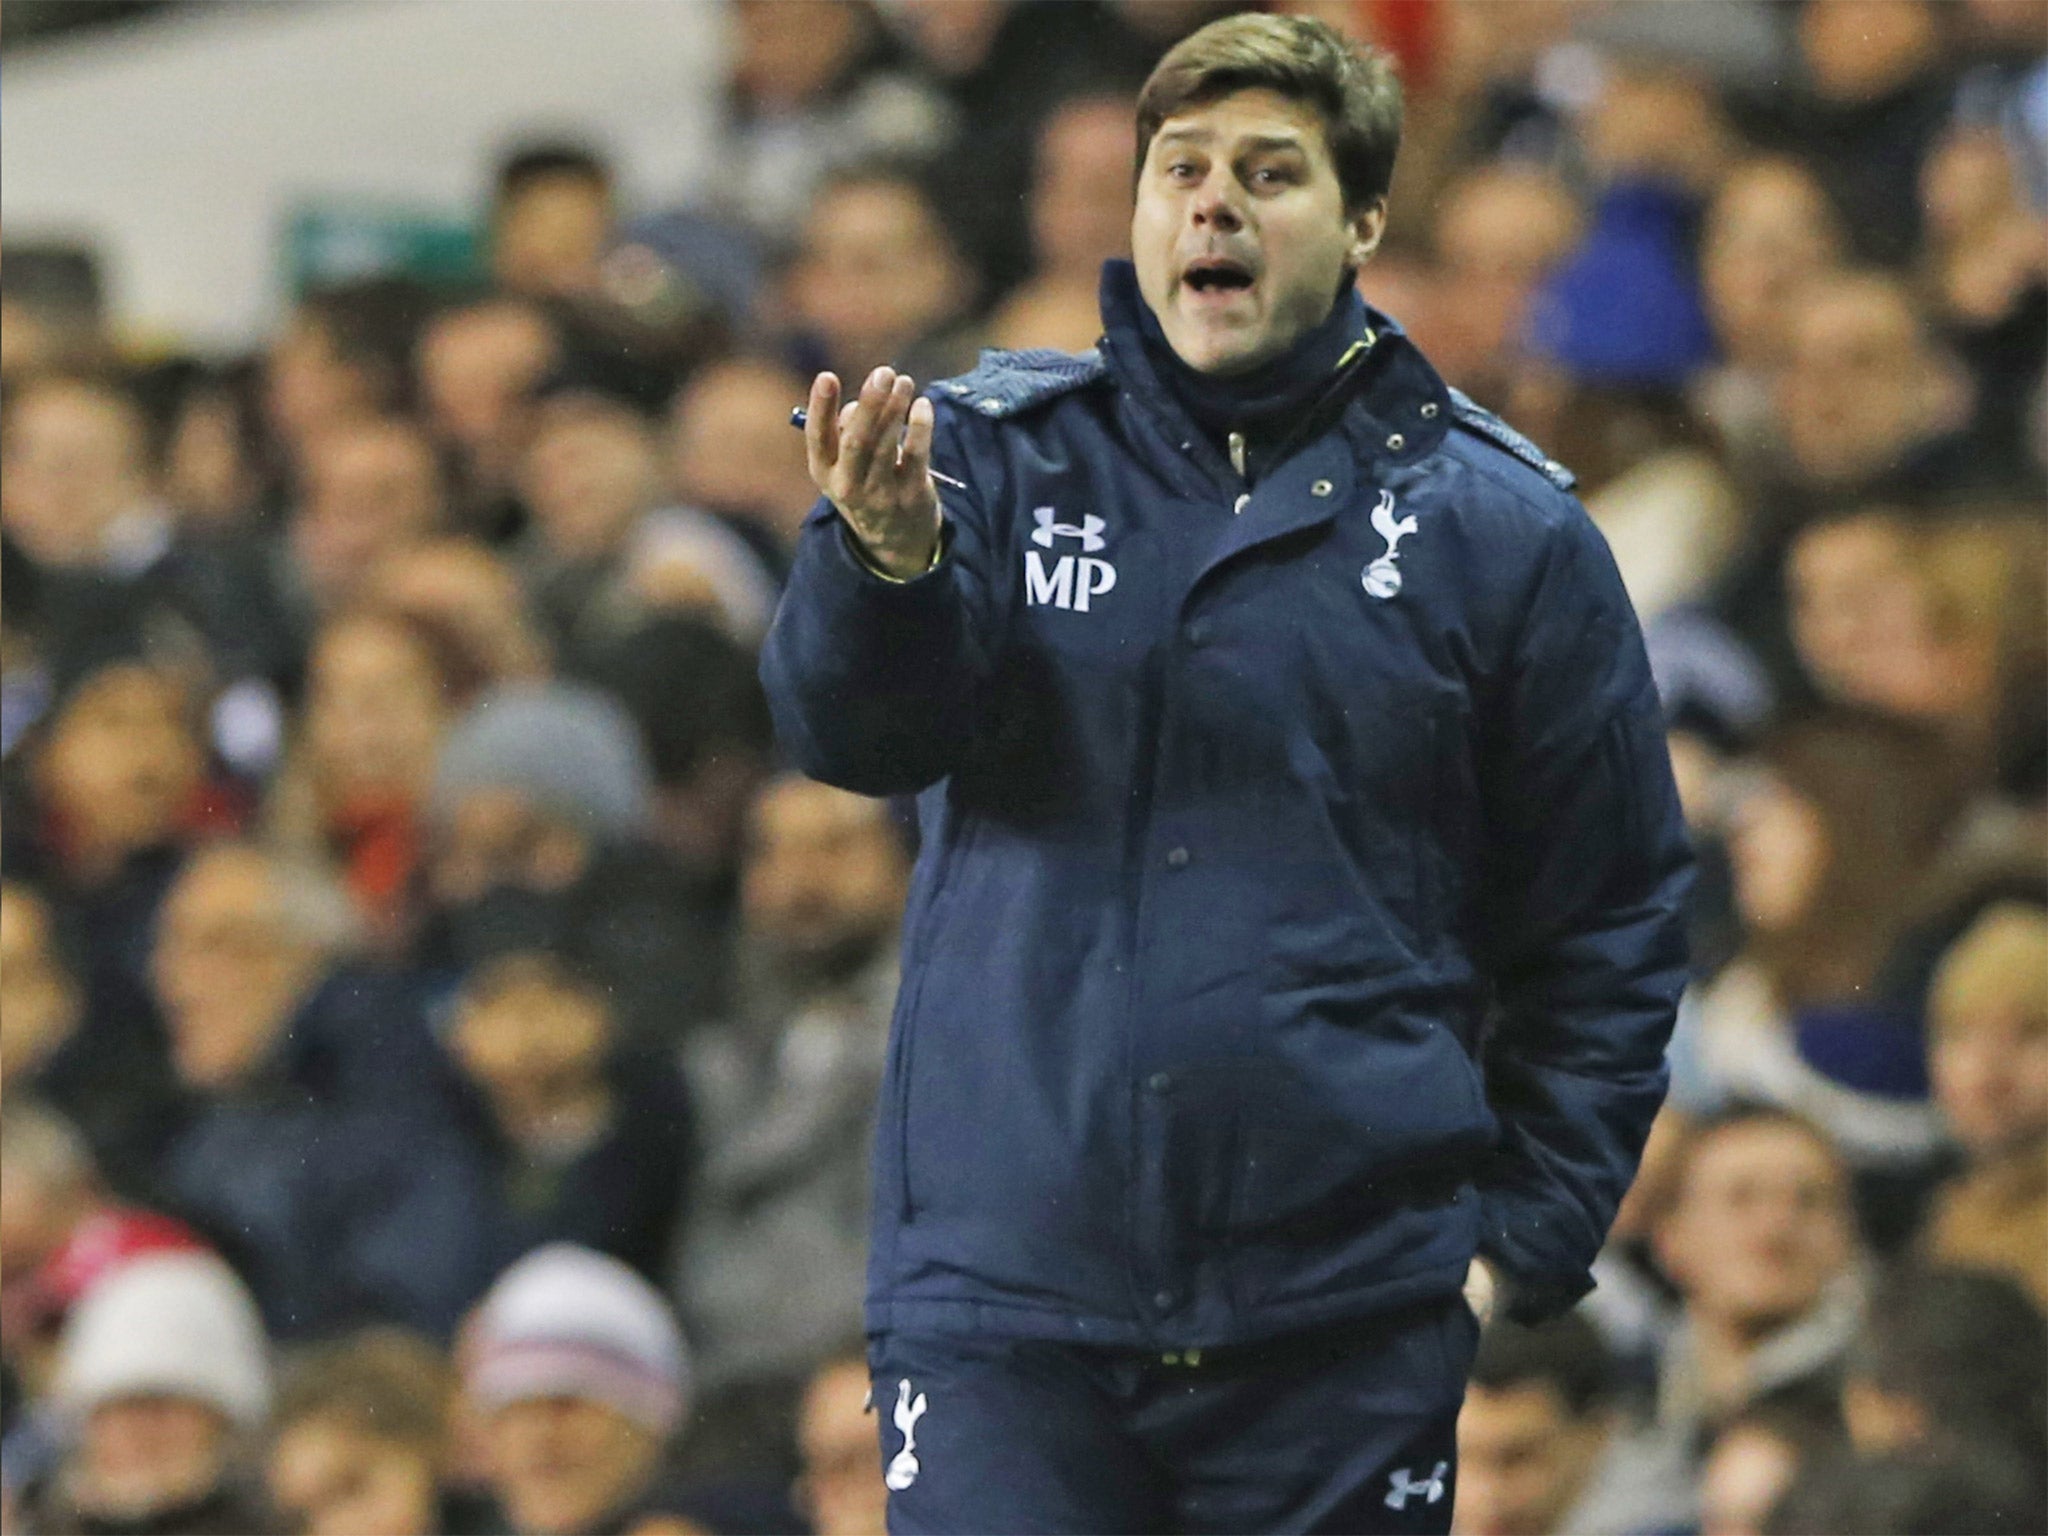 Tottenham manager Mauricio Pochettino issues instructions during his side's 4-2 victory